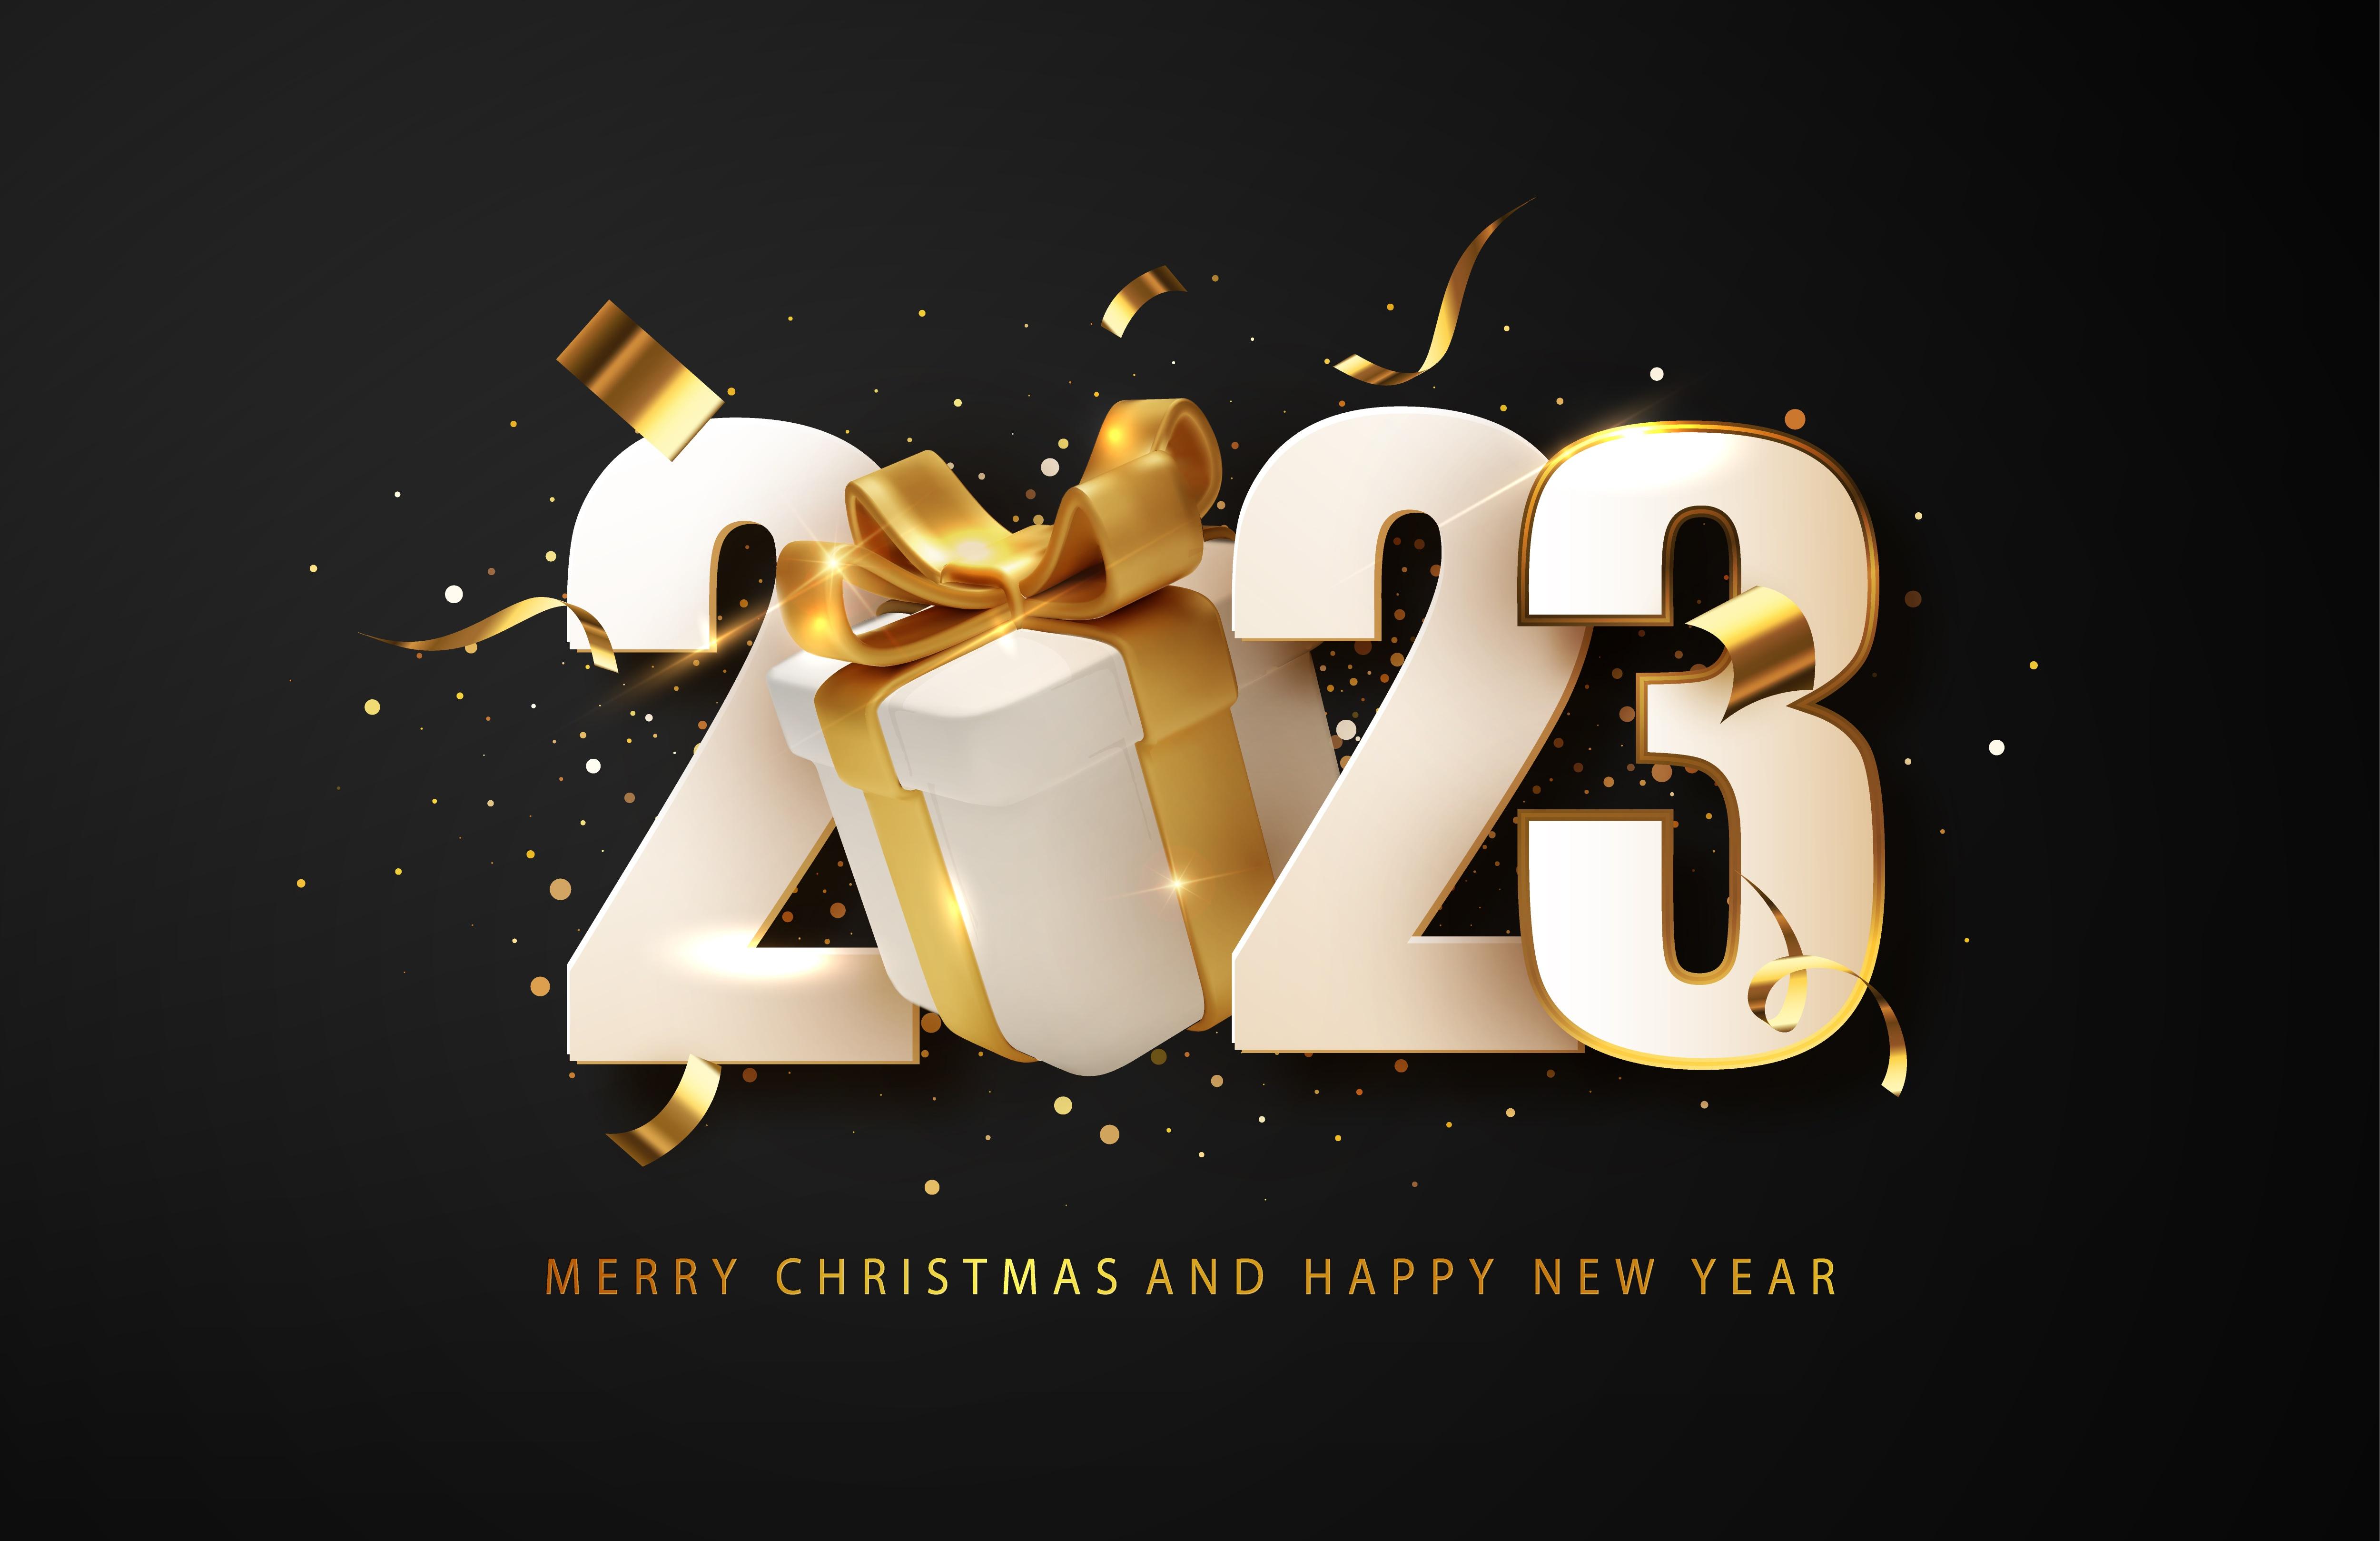 Happy New Year Background Design Graphic By